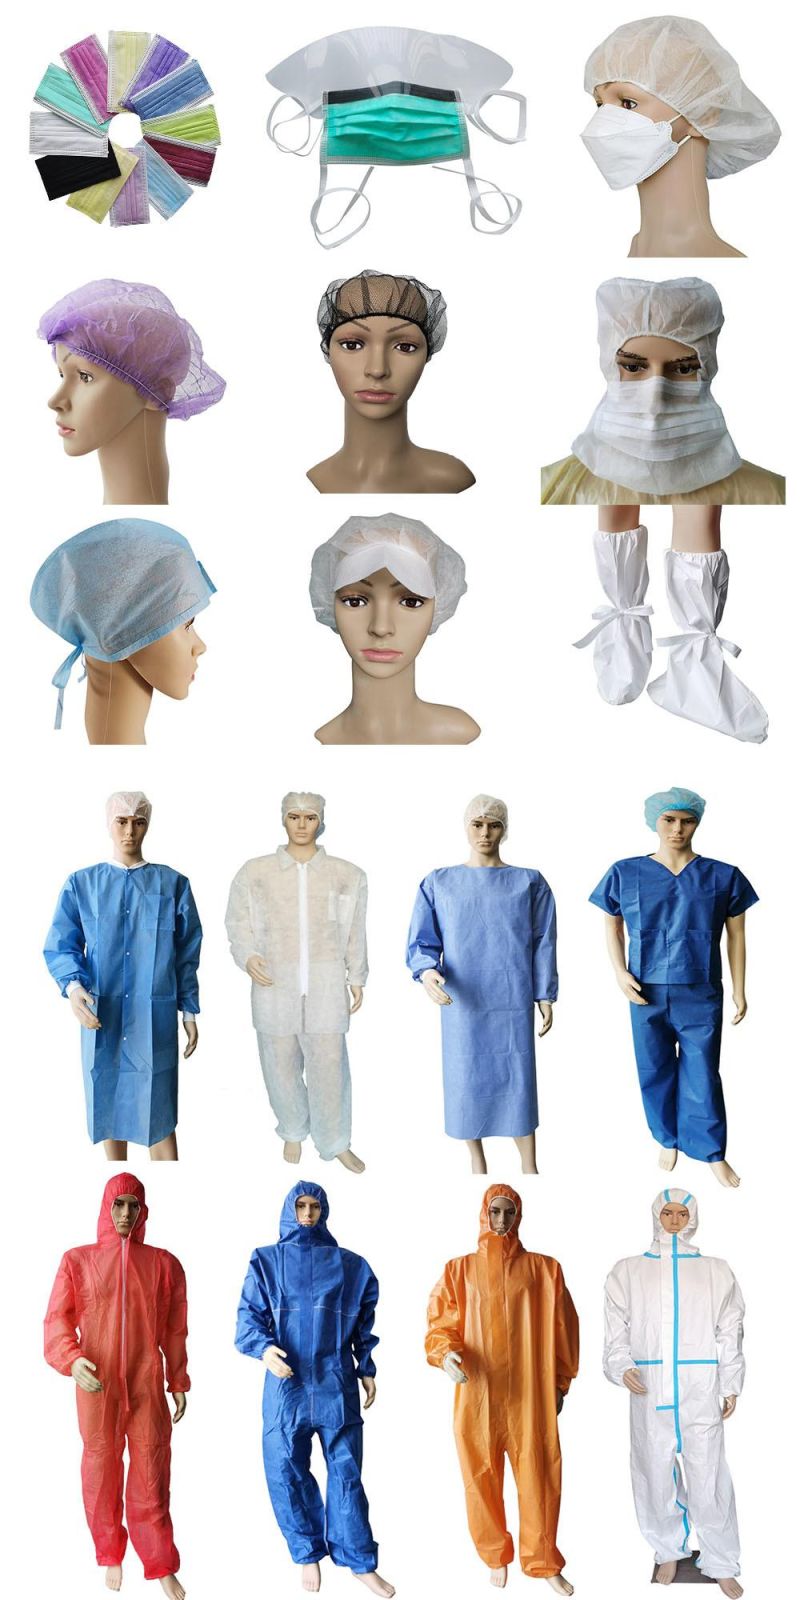 En13795 Antistatic Sterilized Reinforced Gowns Hygienic Anti Bacteria and Virus Invading Surgical Cloak Non Woven Surgical Coat Non Woven Medical Disposables